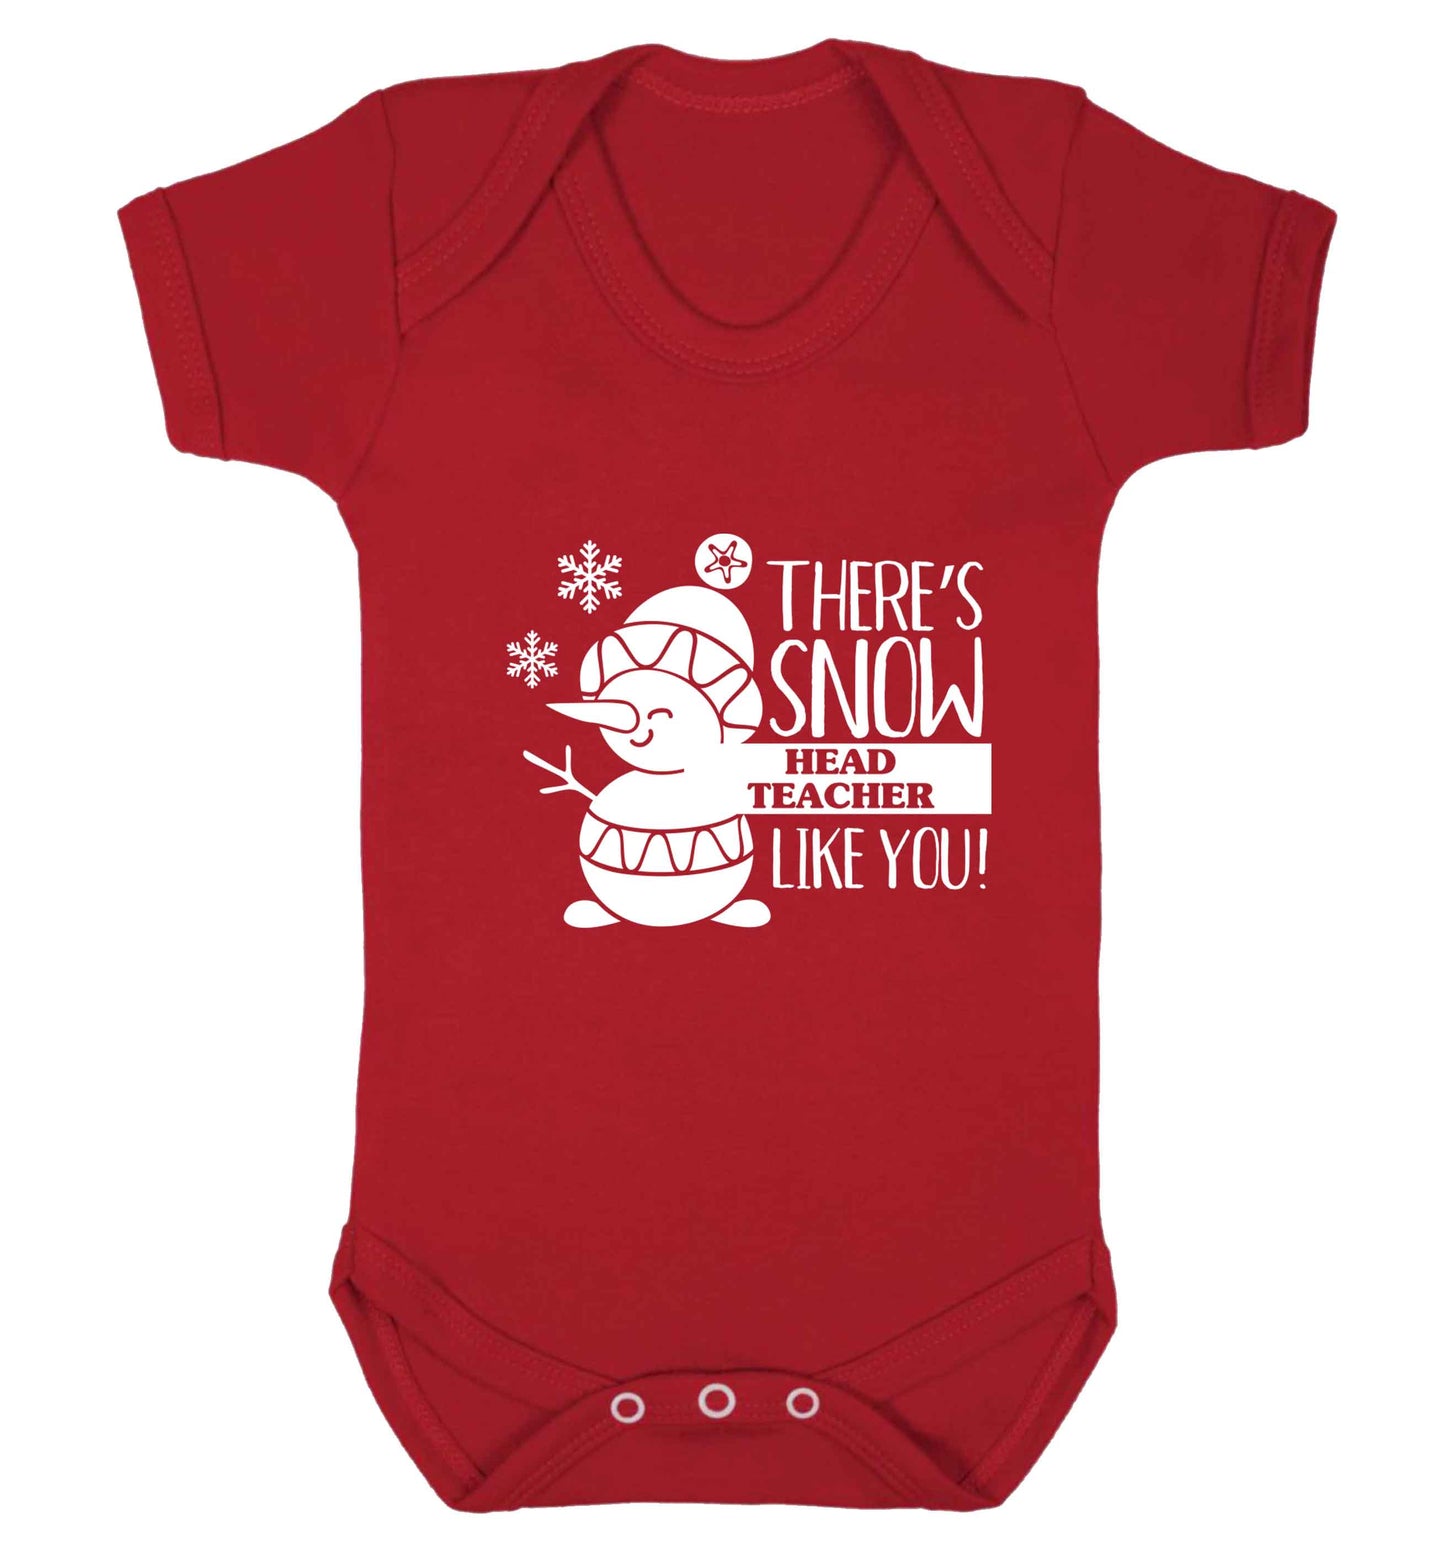 There's snow head teacher like you baby vest red 18-24 months